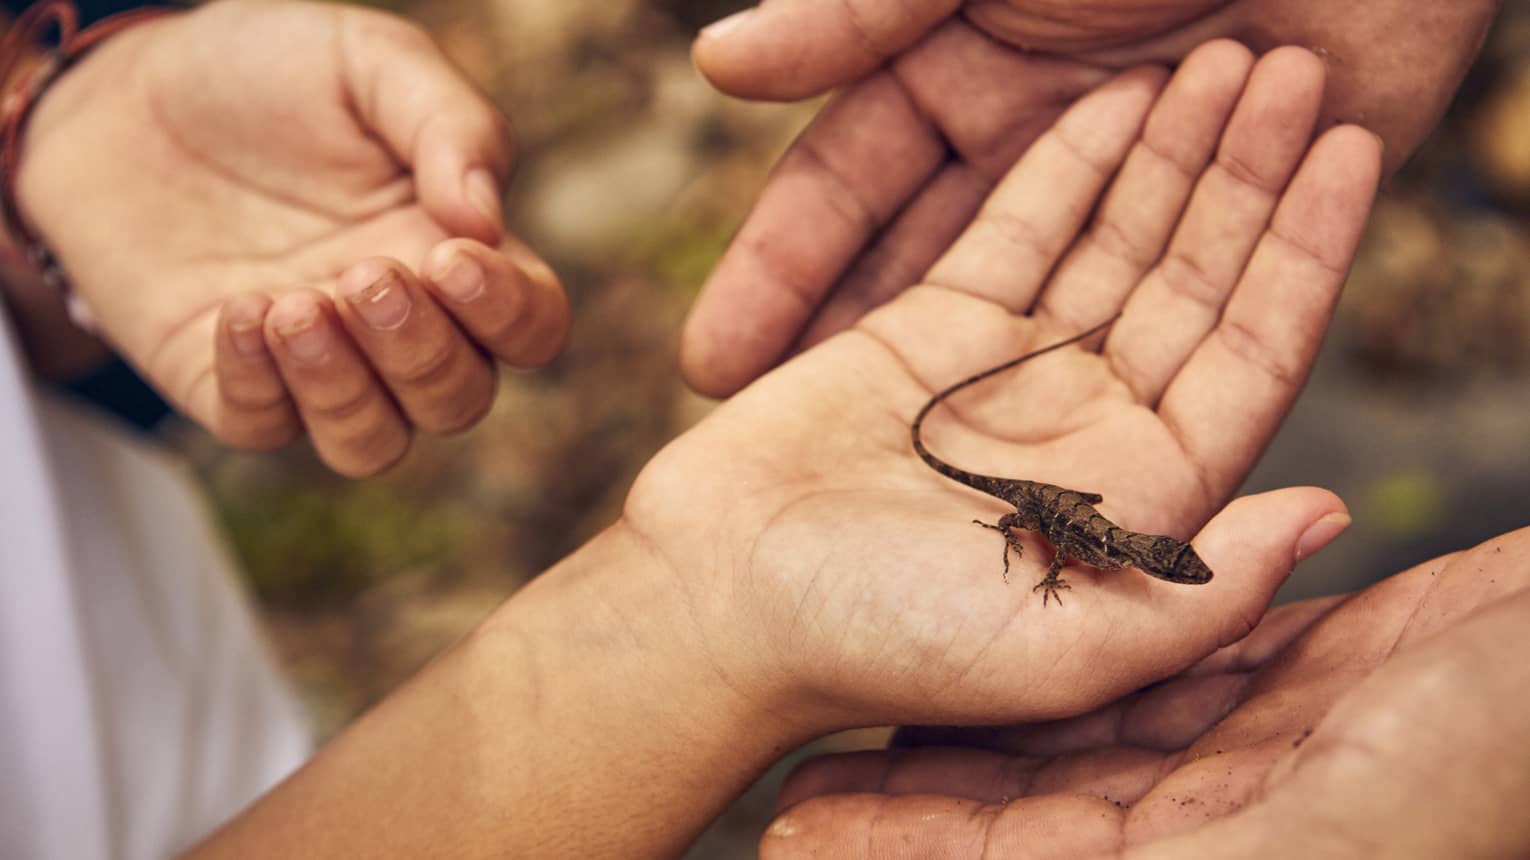 Close up of a small brown-and-black lizard being held in the palm of someones hand